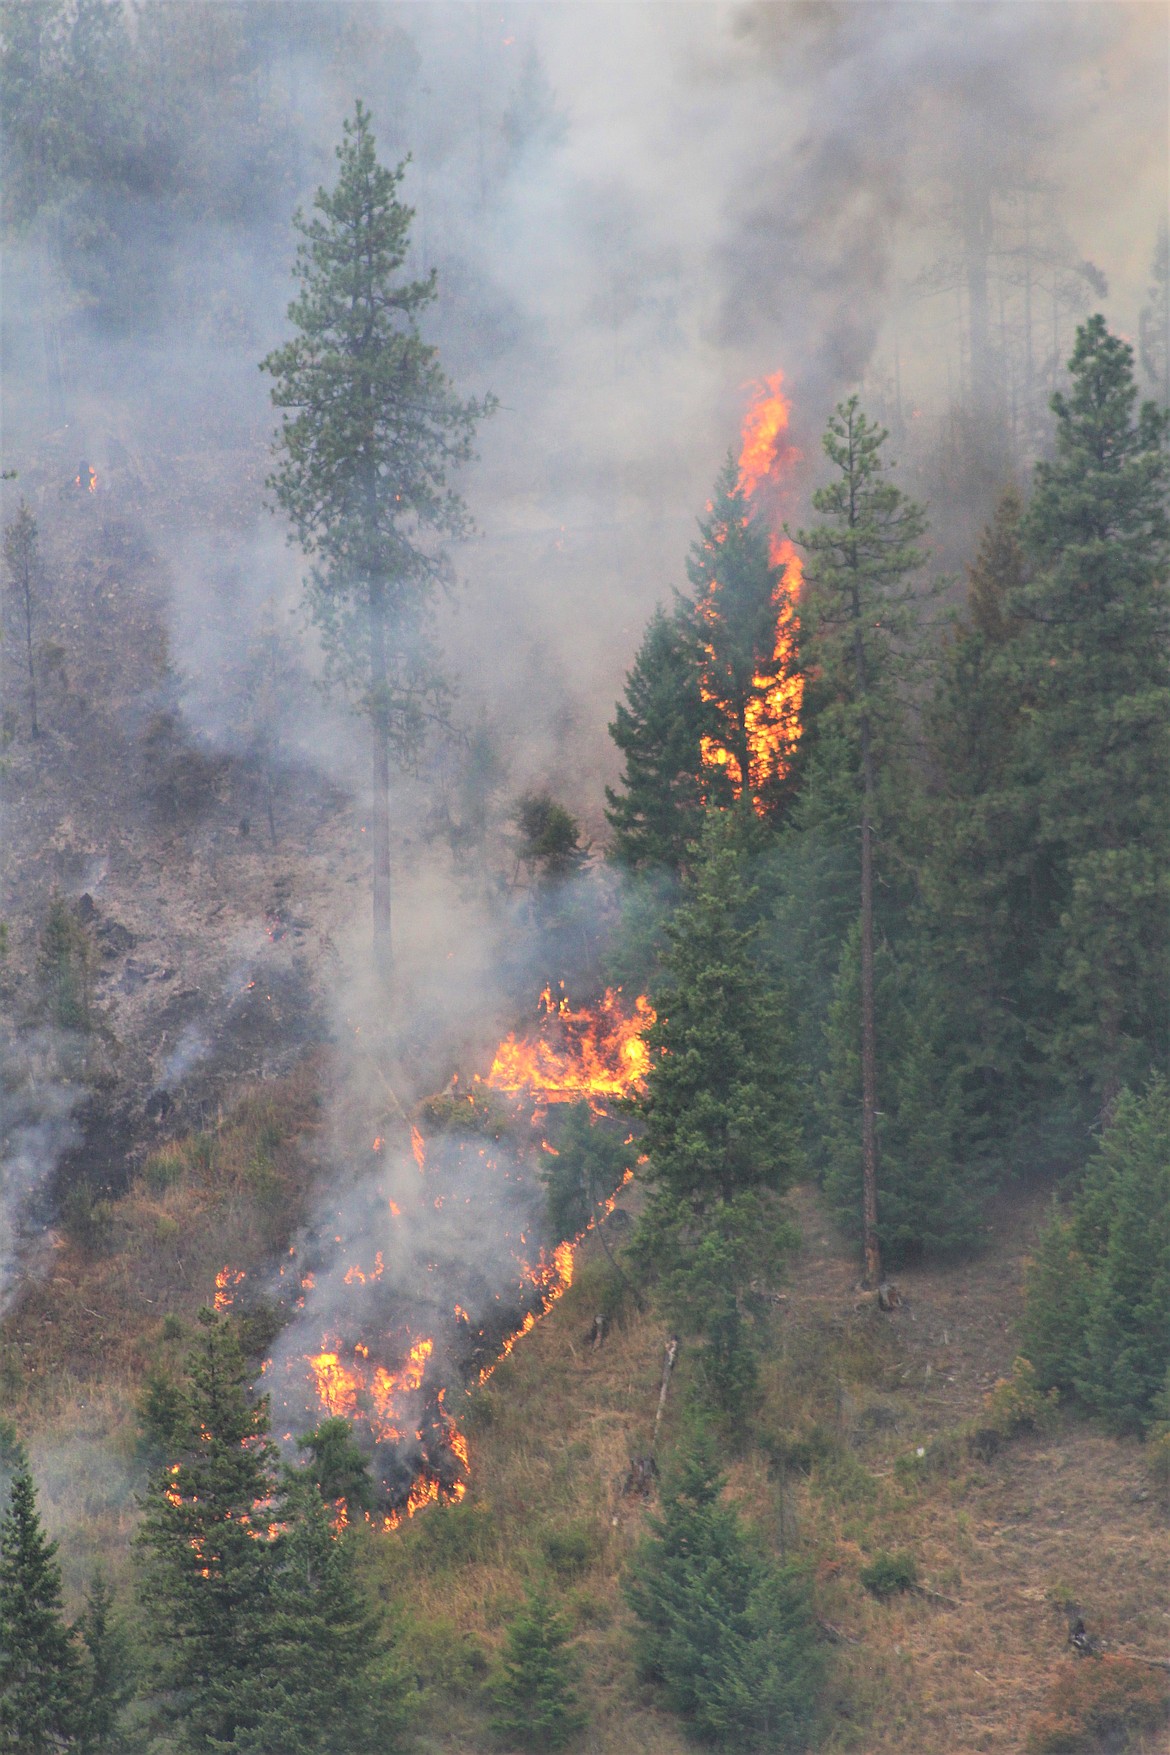 The wildfire has given crews difficulties, as much of it affecting hilly terrain.